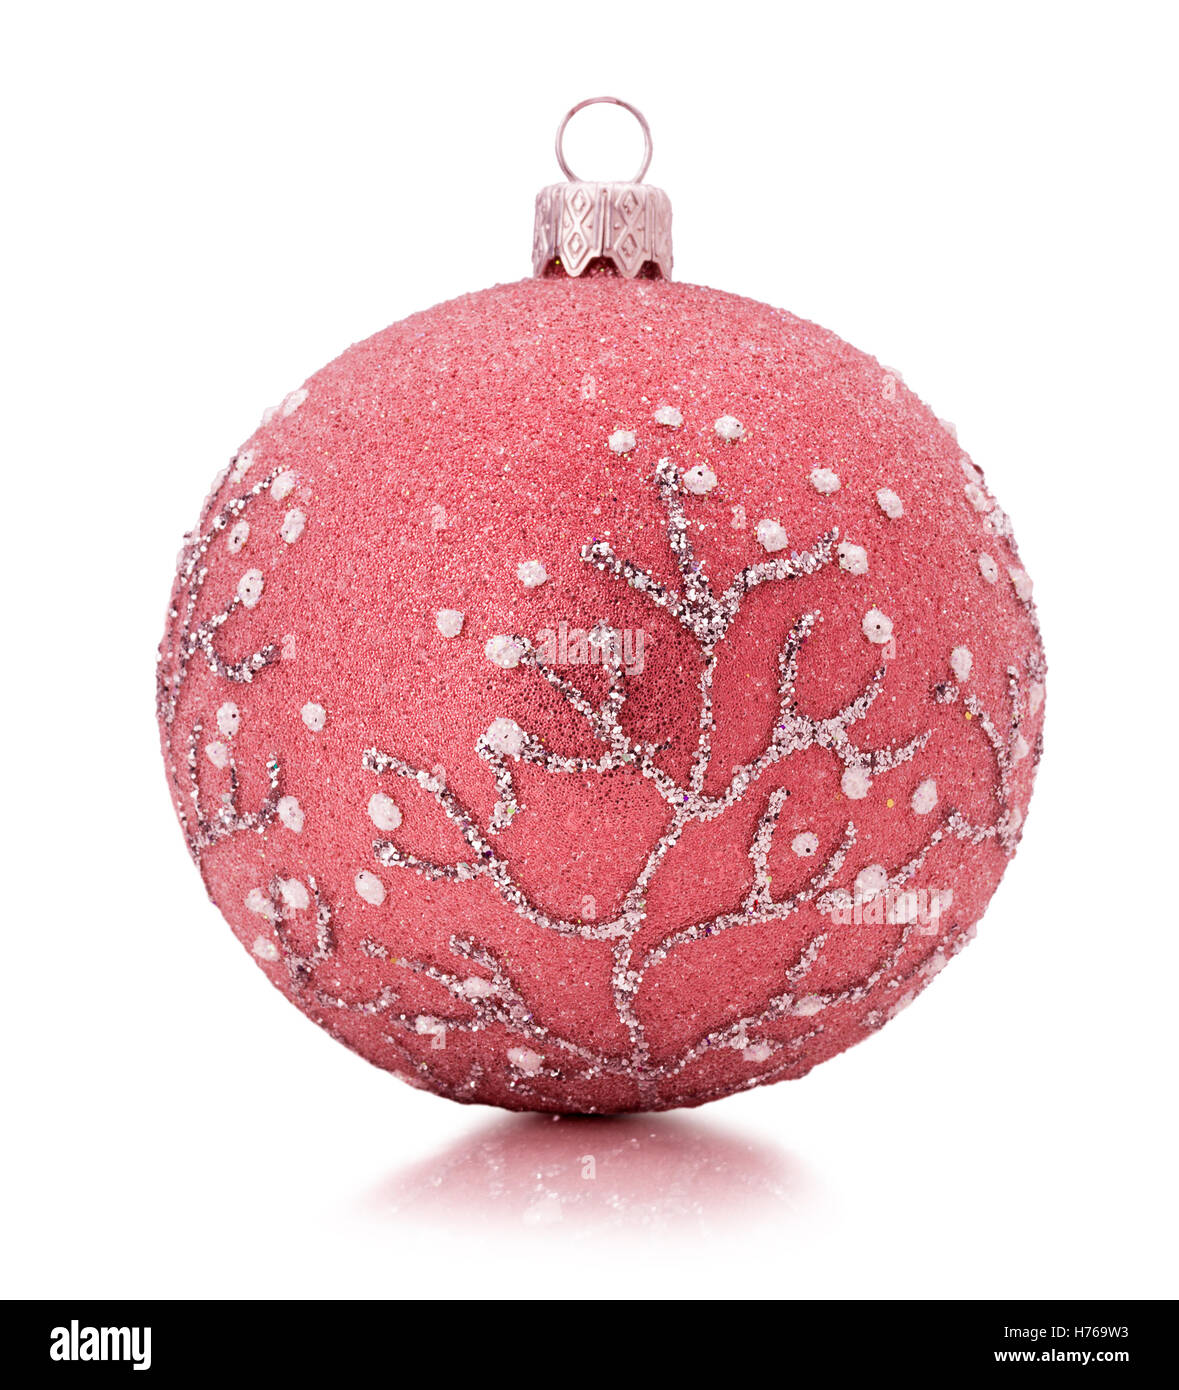 red Christmas tree ball isolated on the white background. Stock Photo